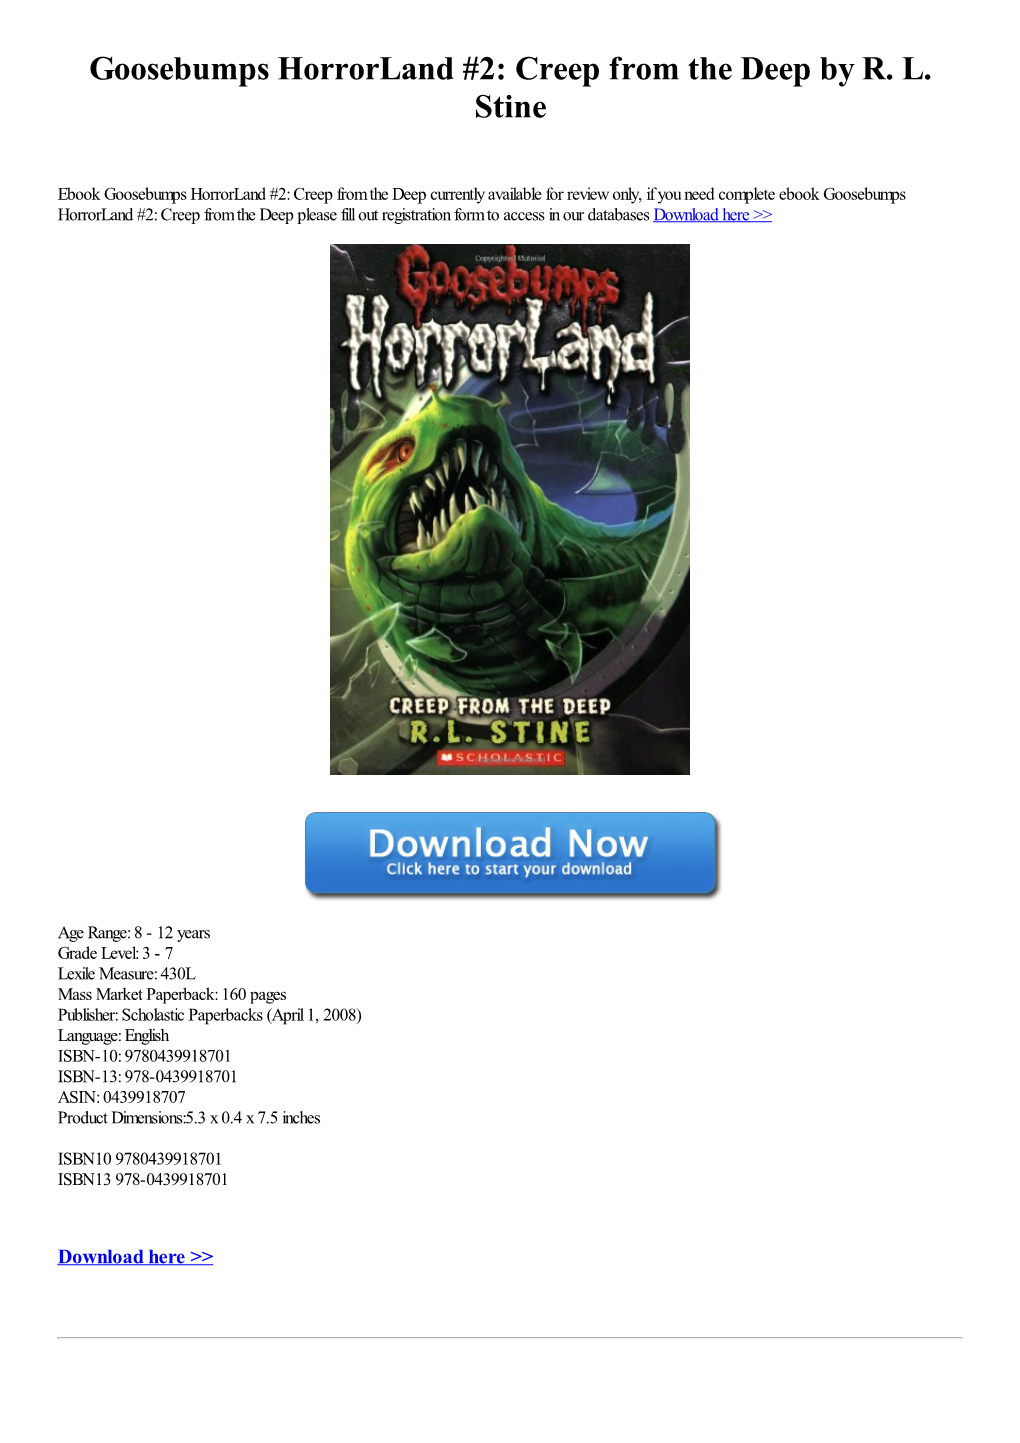 Goosebumps Horrorland #2: Creep from the Deep by R. L. Stine [Pdf]